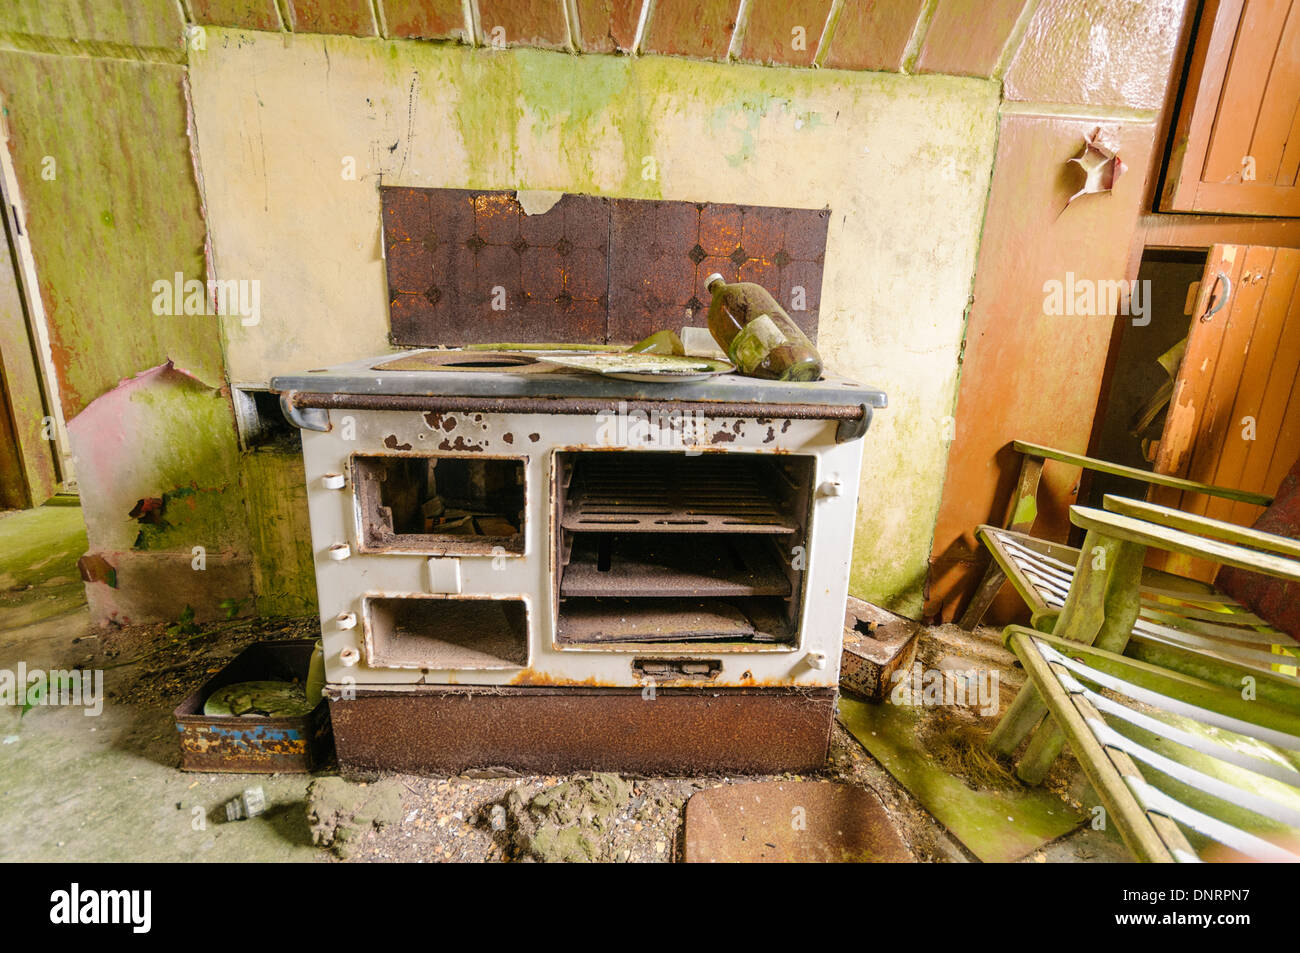 Rusting and broken old range cooker in an abandoned house Stock Photo